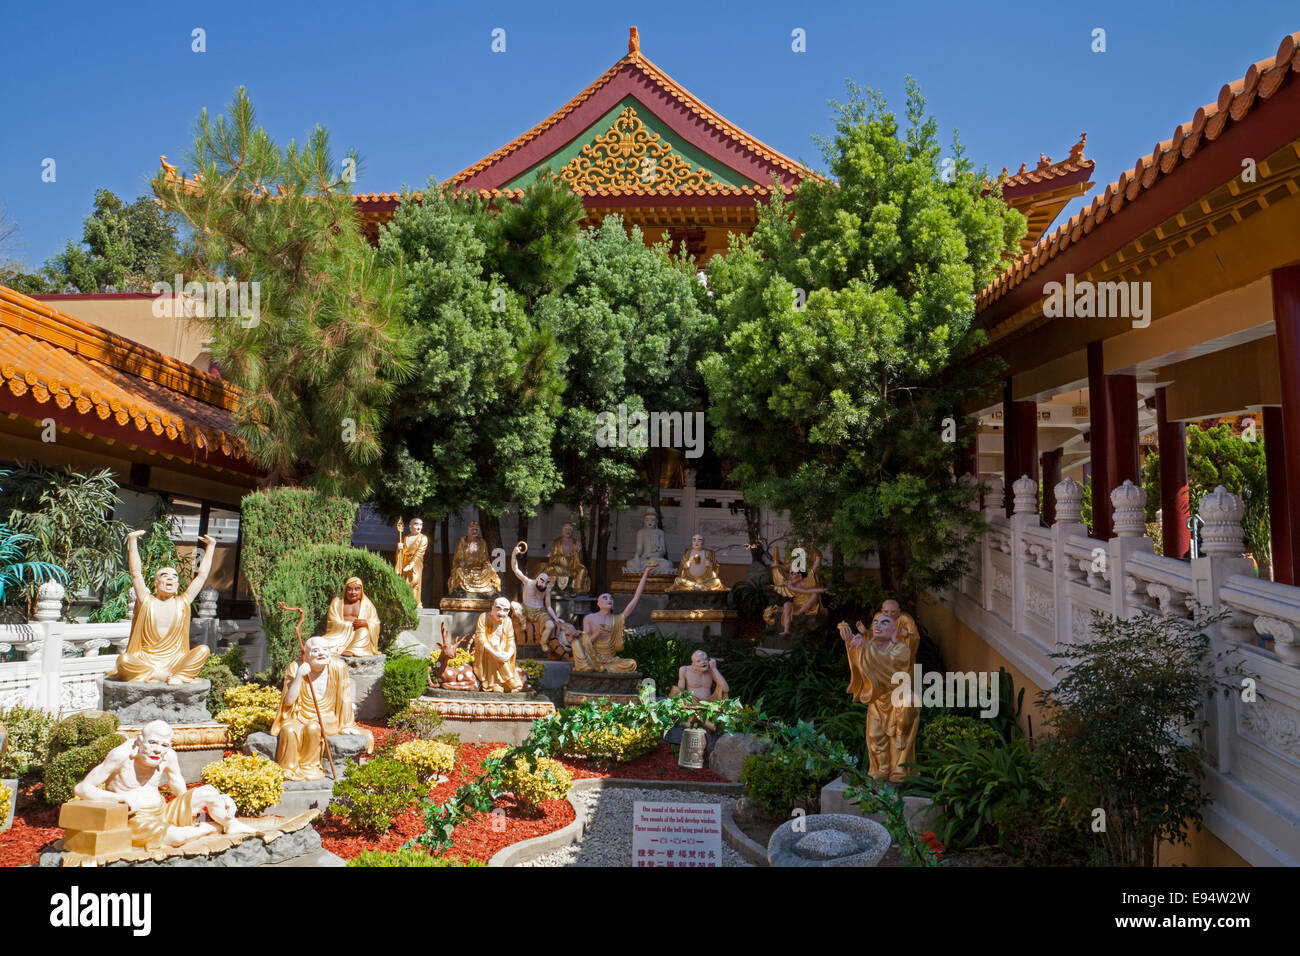 The Arhat Garden located on the left of the Hsi Lai temple, Hacienda Heights, California, USA Stock Photo